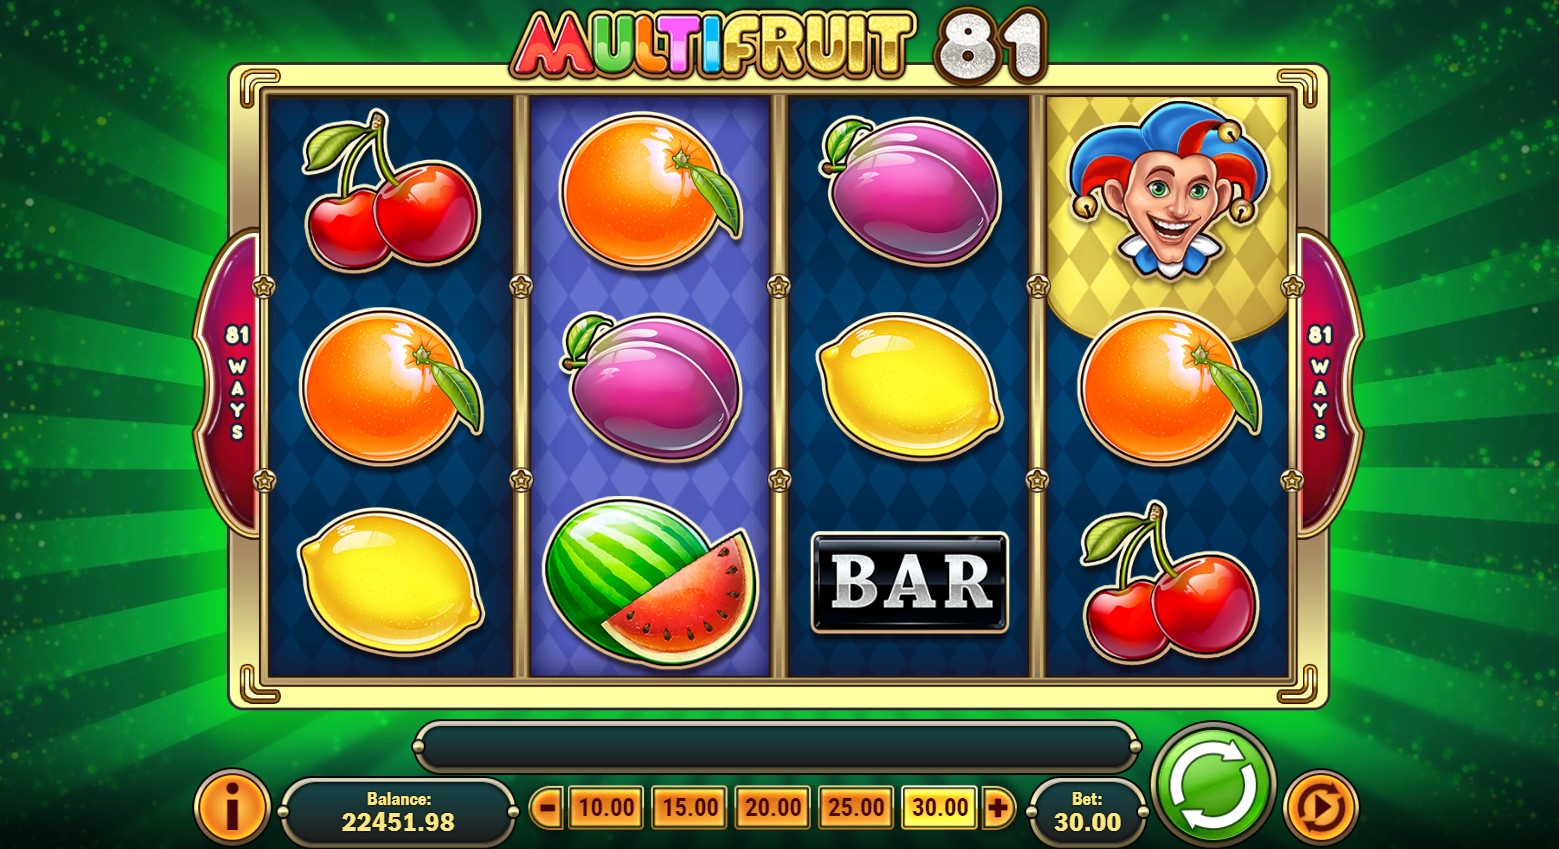 MultiFruit 81 (MultiFruit 81) from category Slots